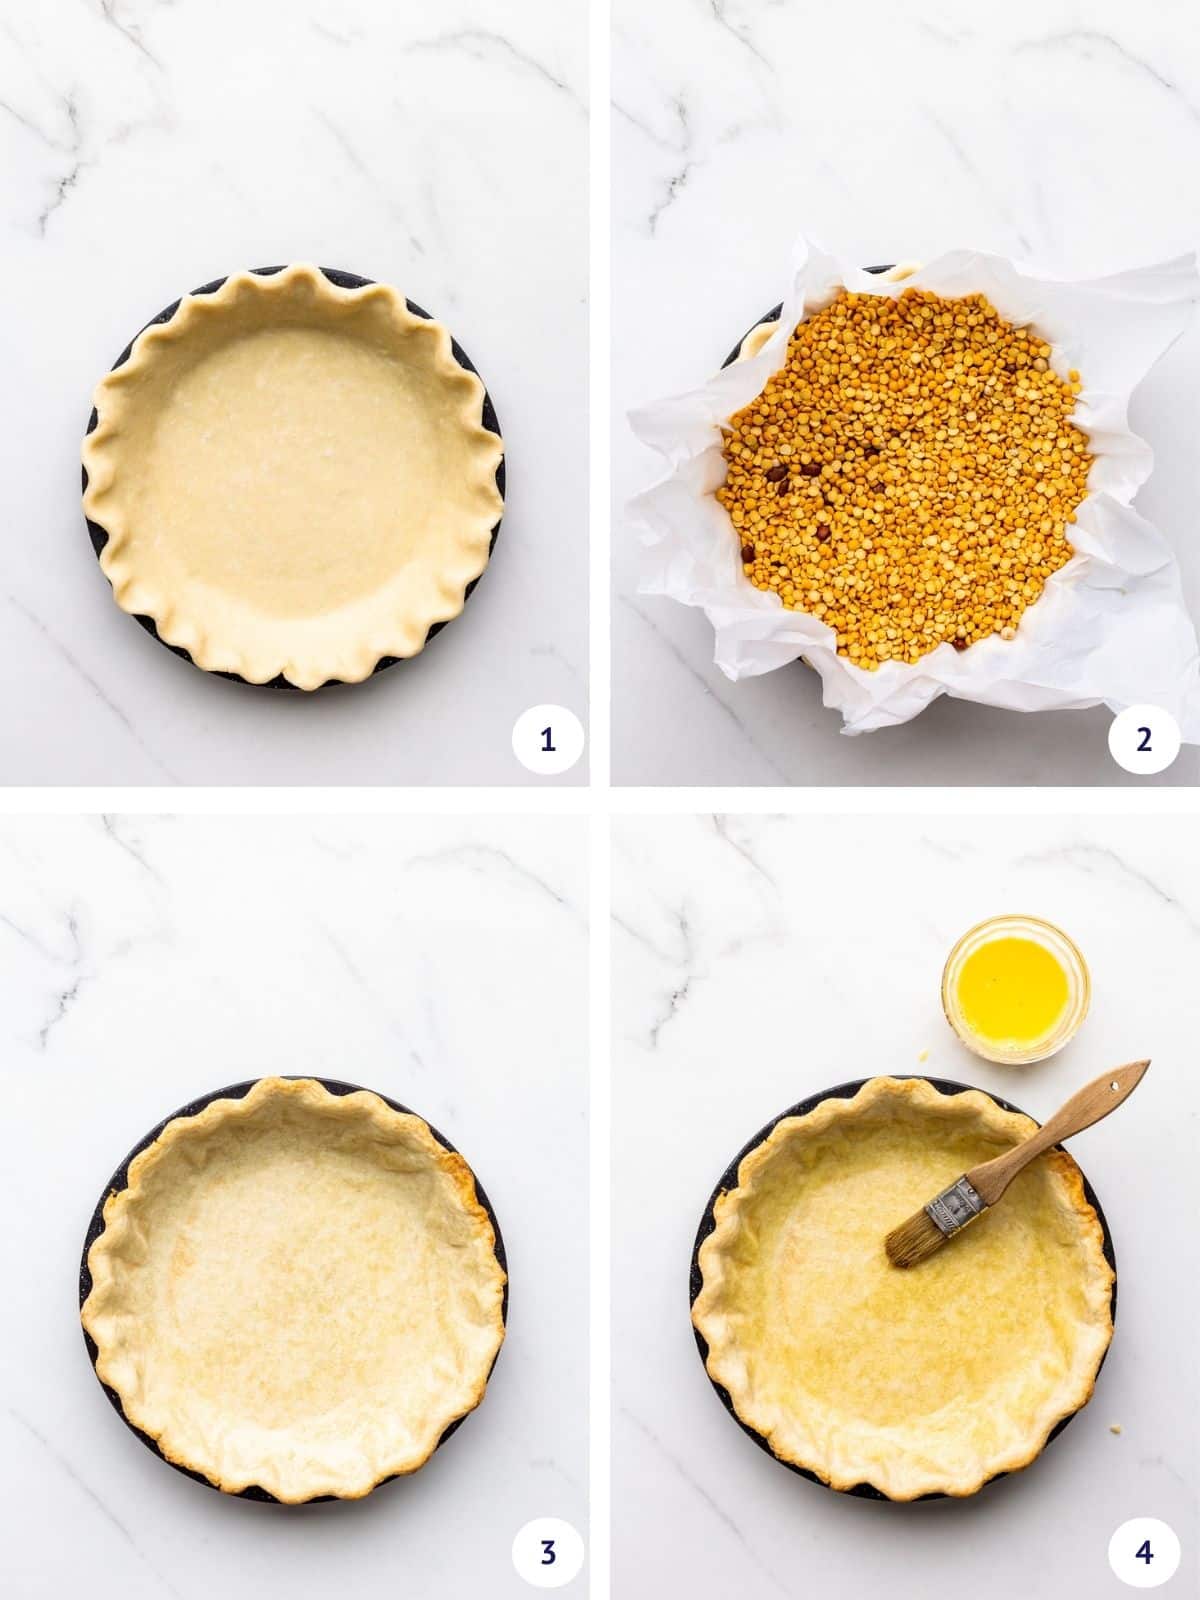 Steps to par-bake a pie crust, including brushing the inside with an egg wash before pouring the wet filling to prevent a soggy pie crust.